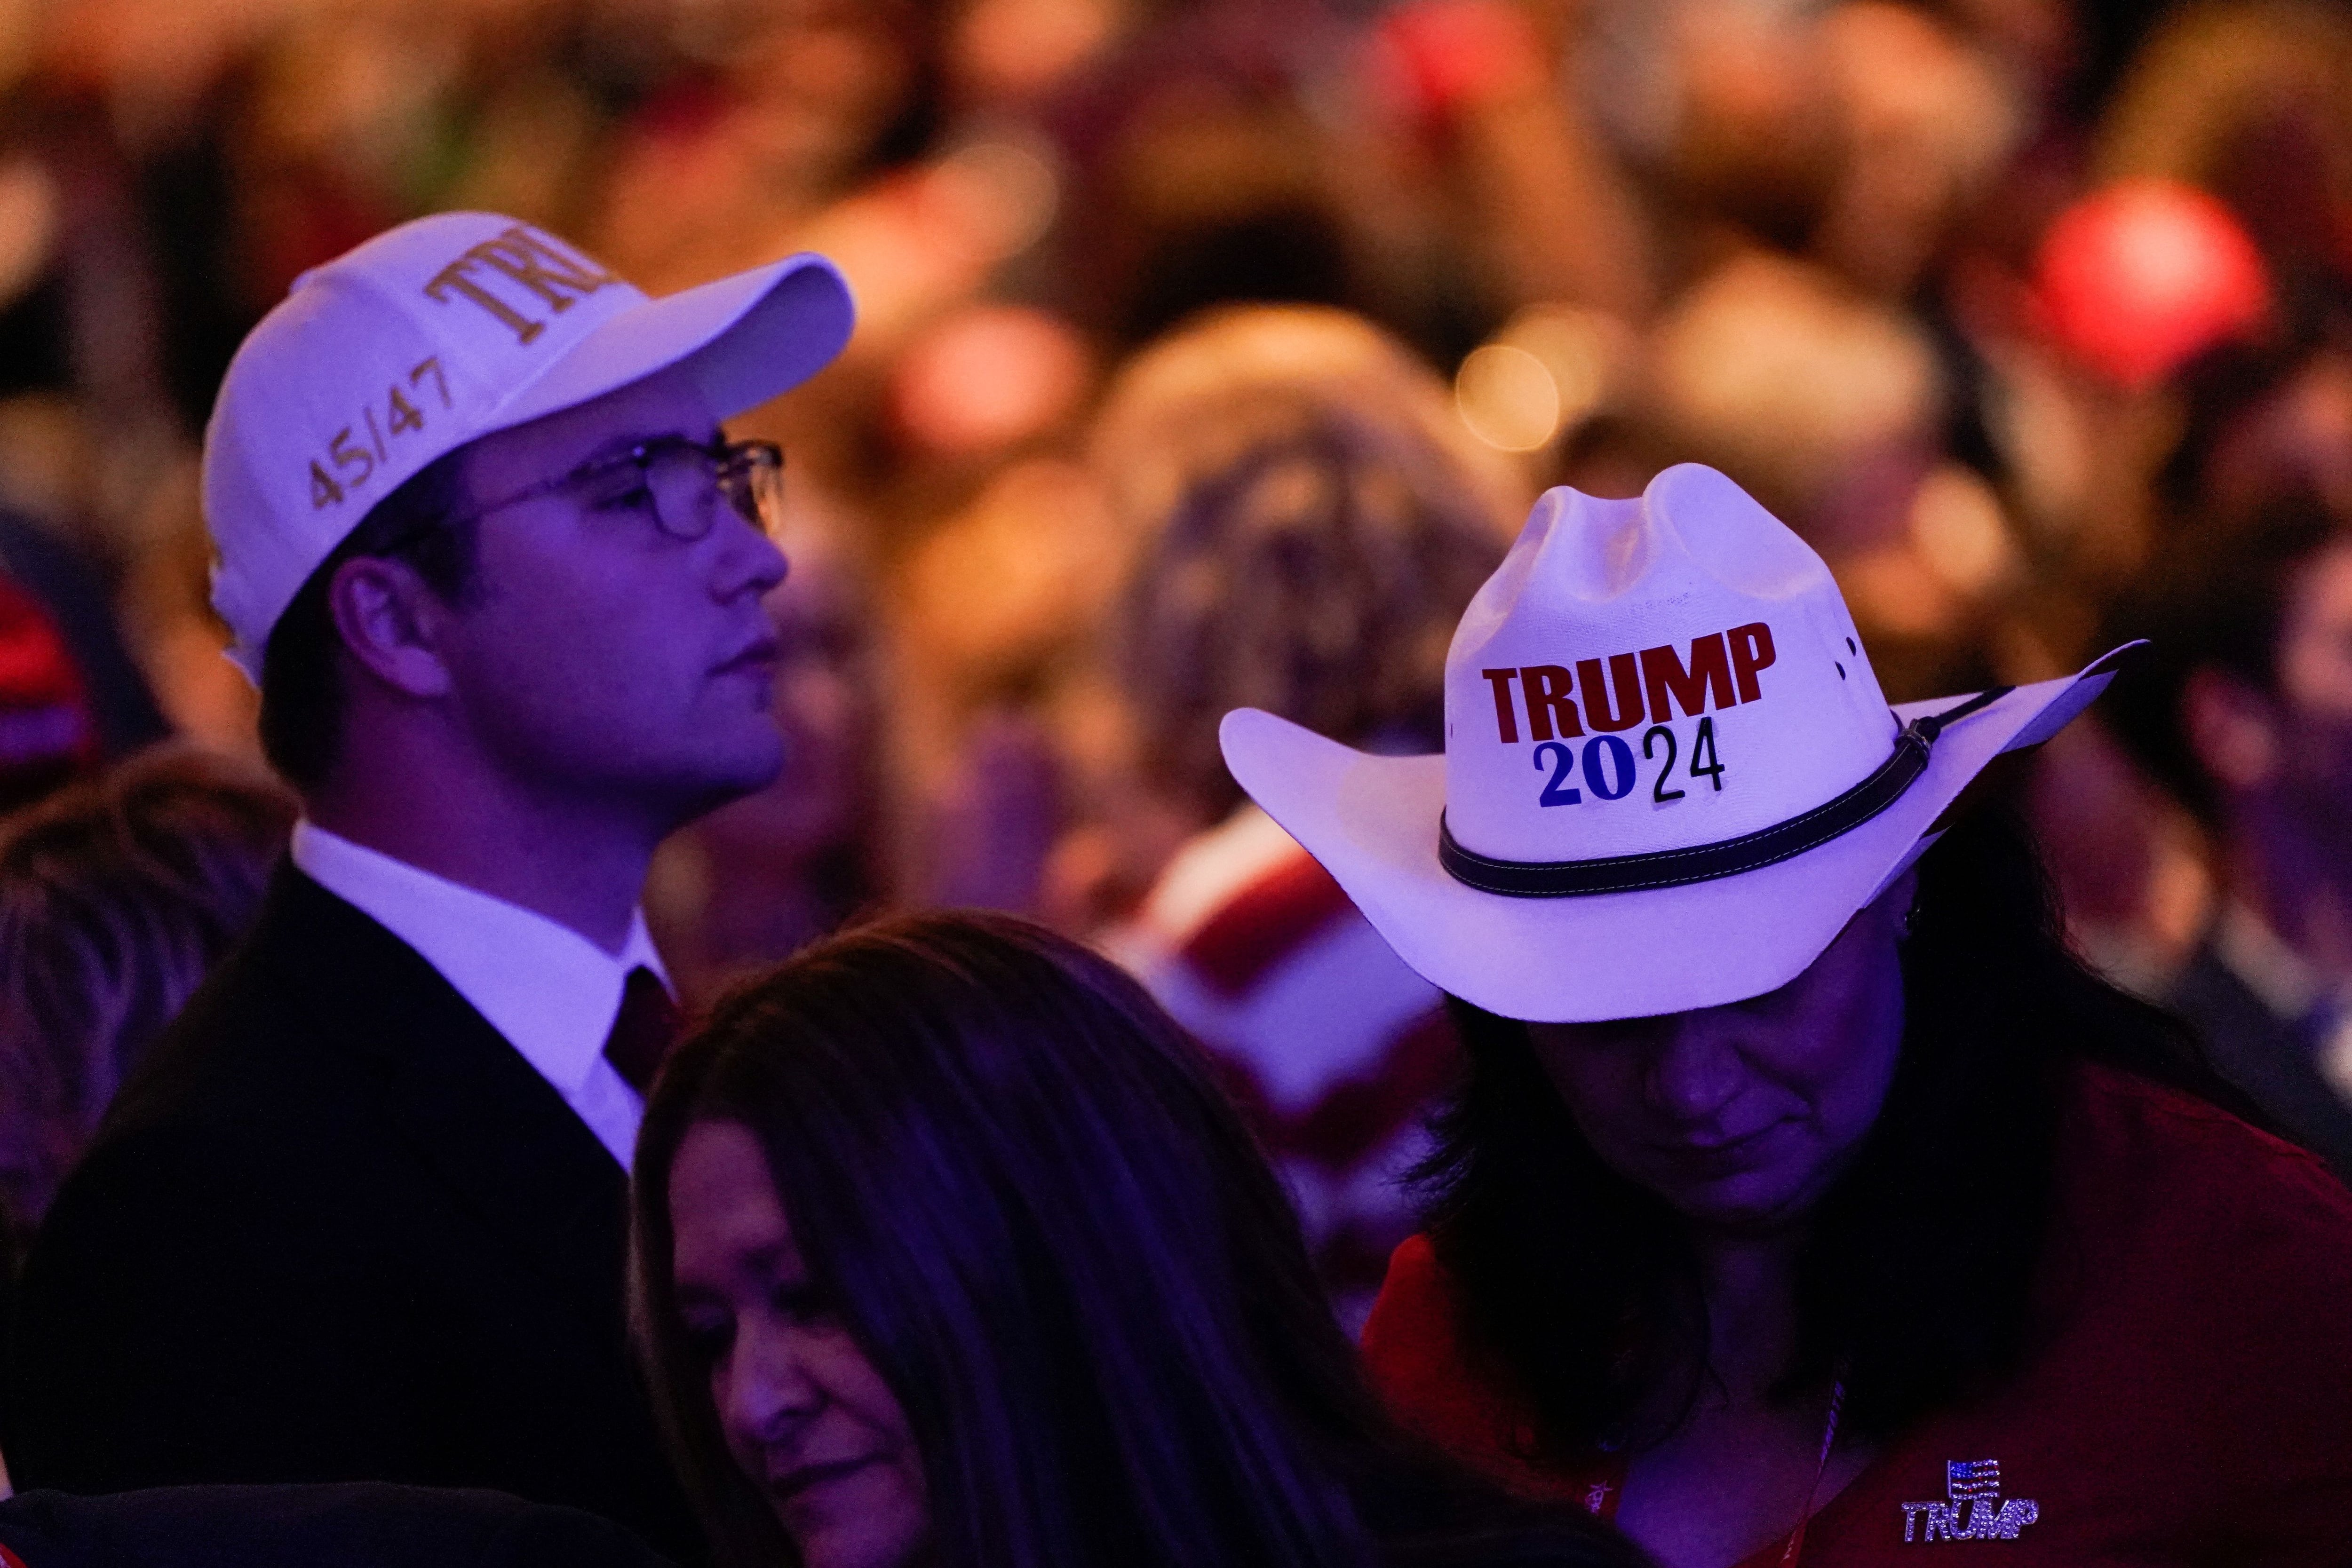 Supporters of former U.S. President and Republican presidential candidate Donald Trump attend the Conservative Political Action Conference (CPAC) annual meeting in National Harbor, Maryland, U.S., February 24, 2024. REUTERS/Elizabeth Frantz